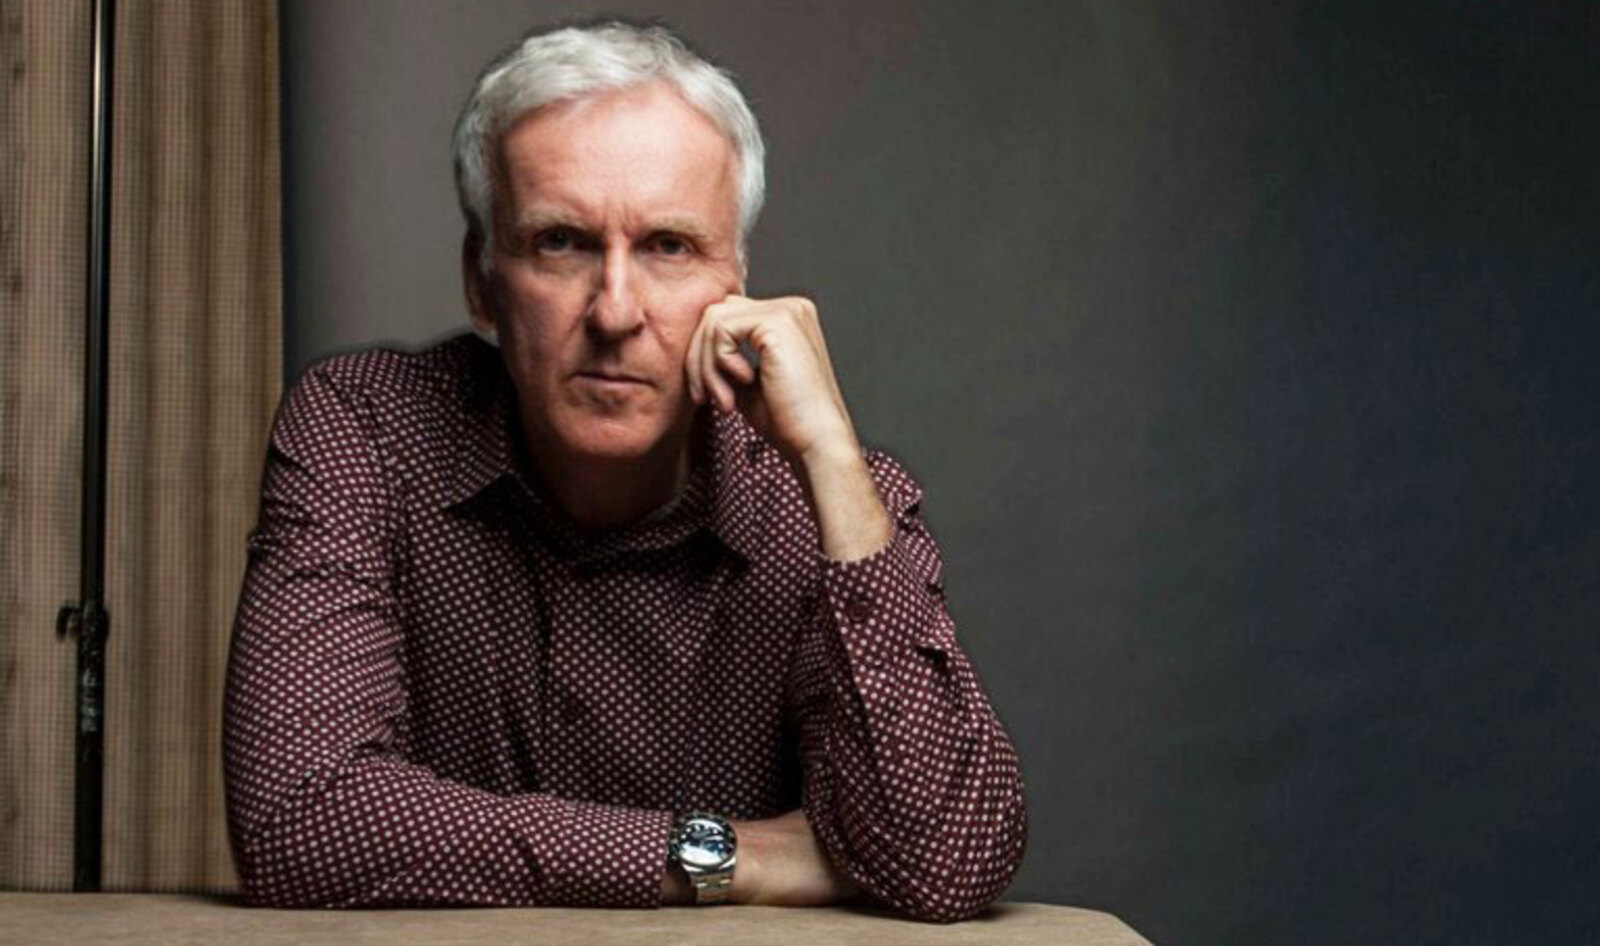 James Cameron’s New National Geographic Series Explores Human Impact on Oceans